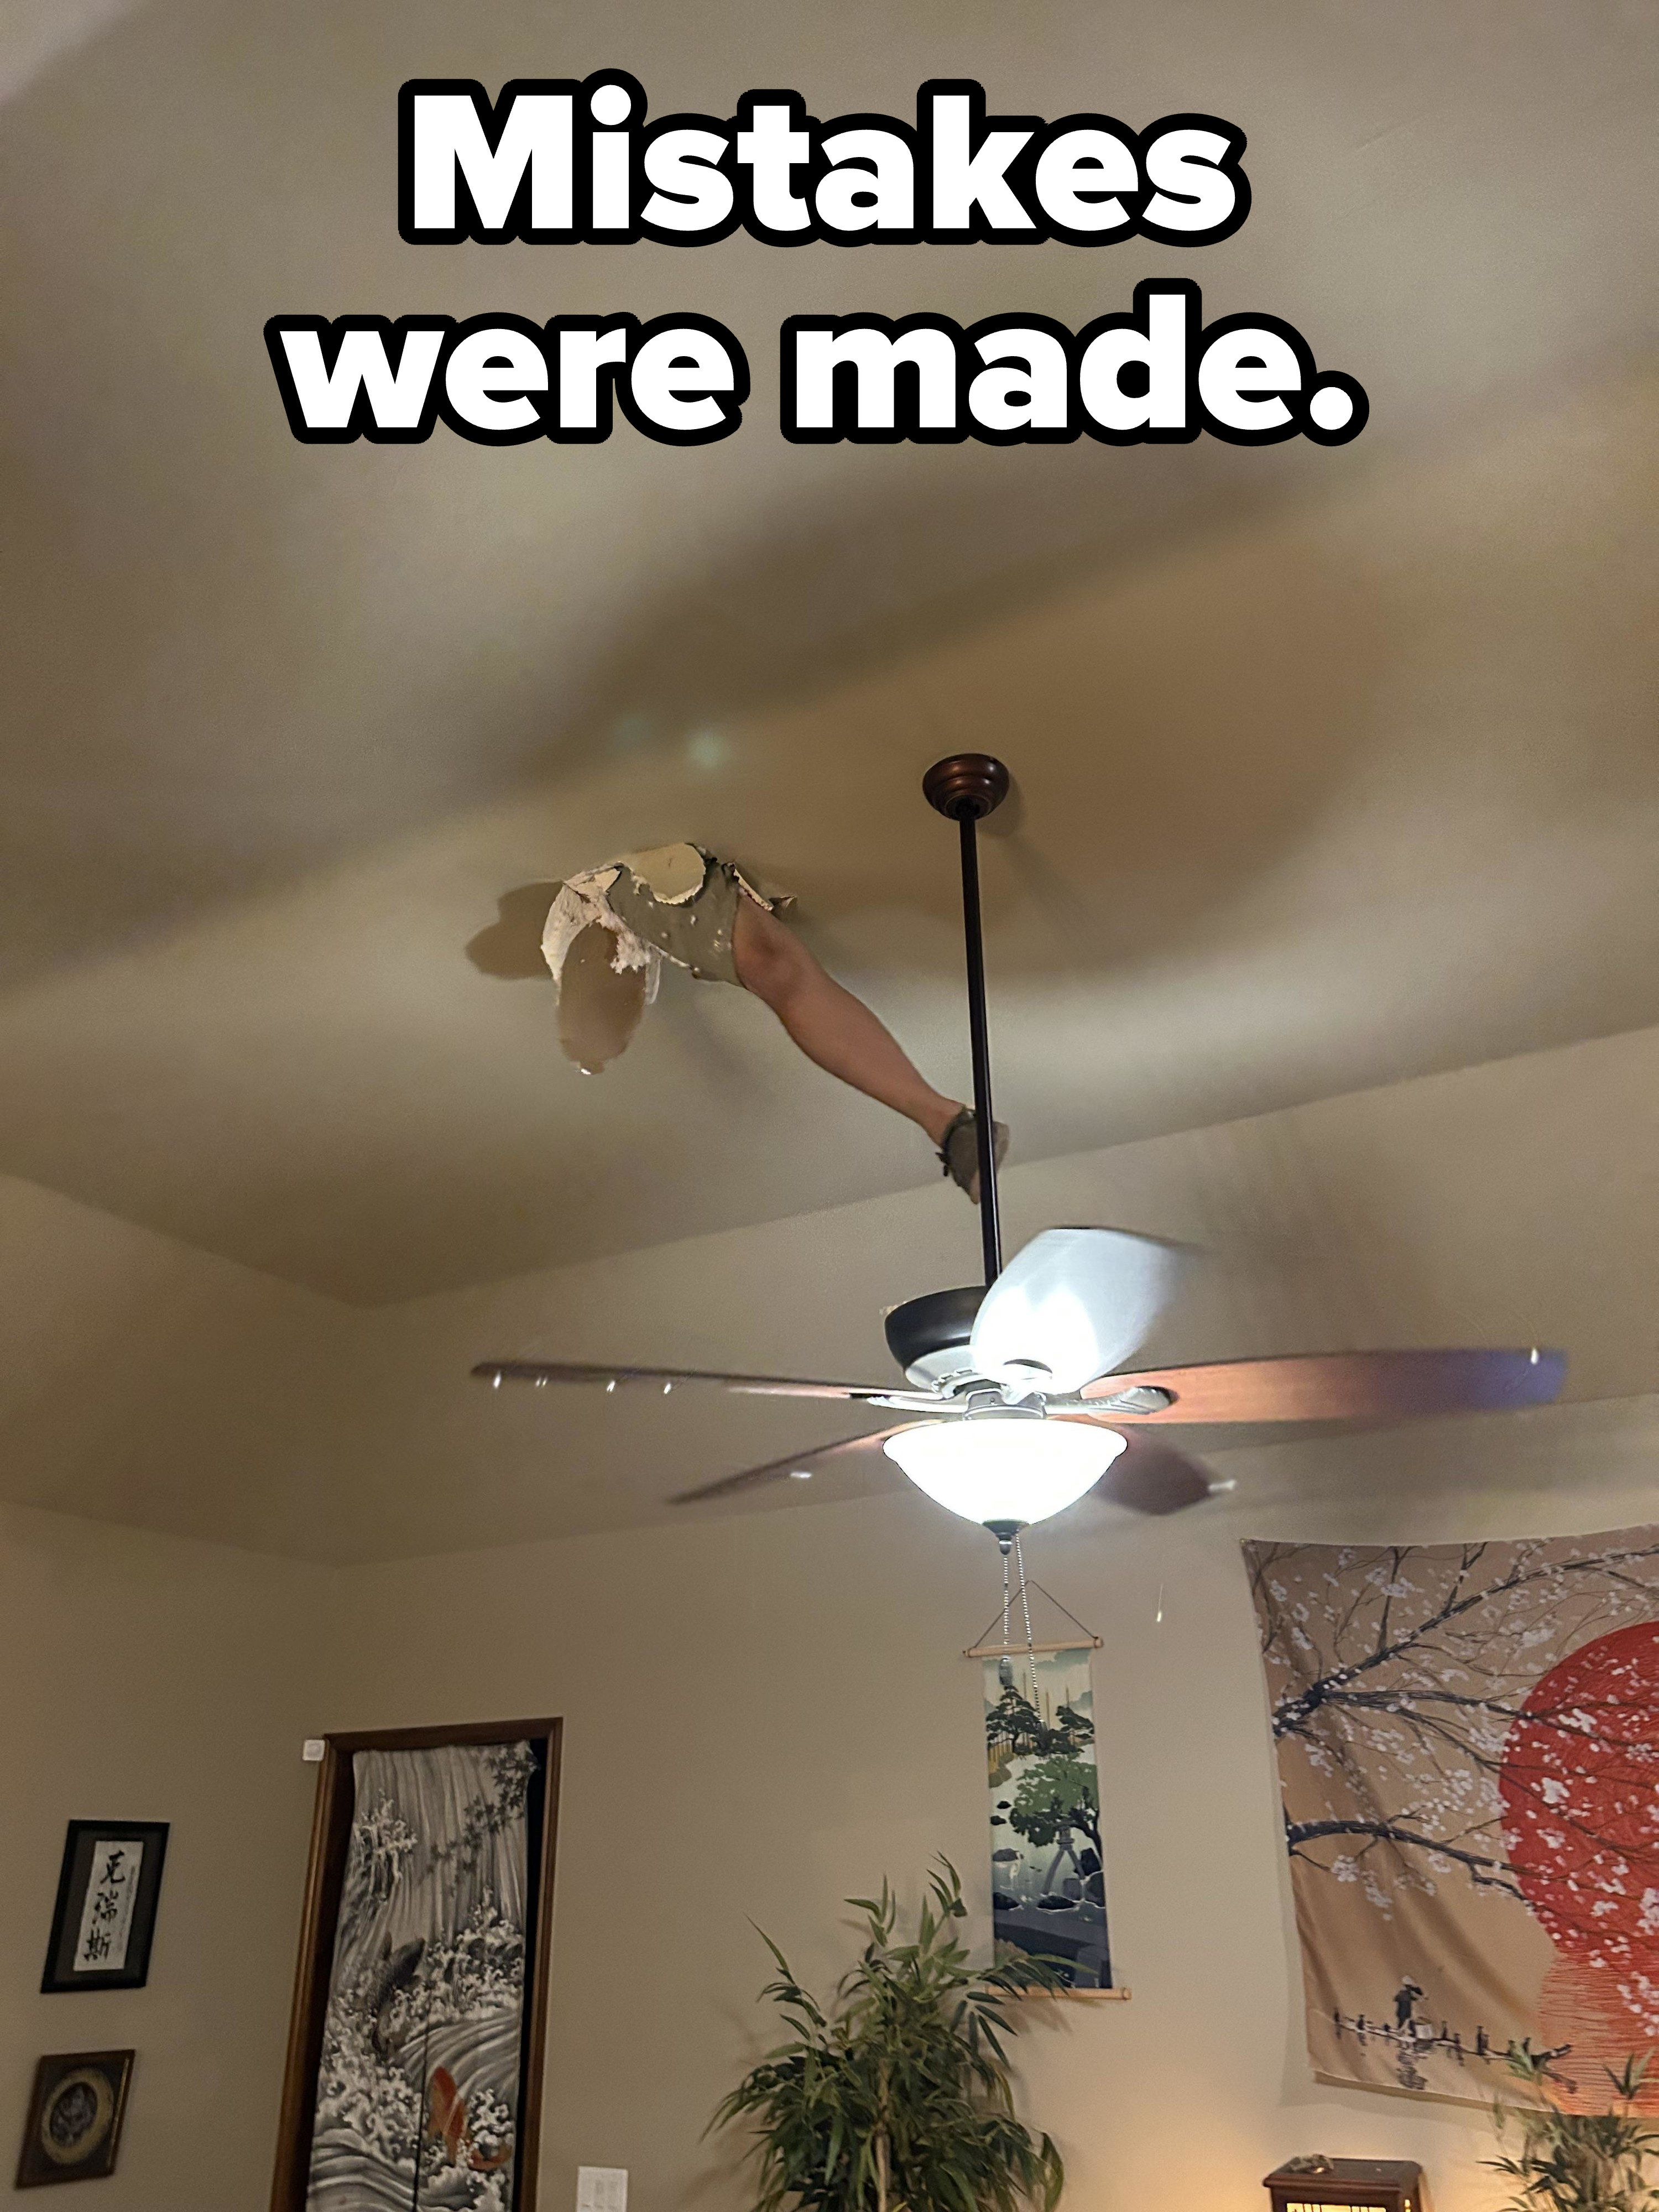 A leg jutting out of a ceiling above a ceiling fan